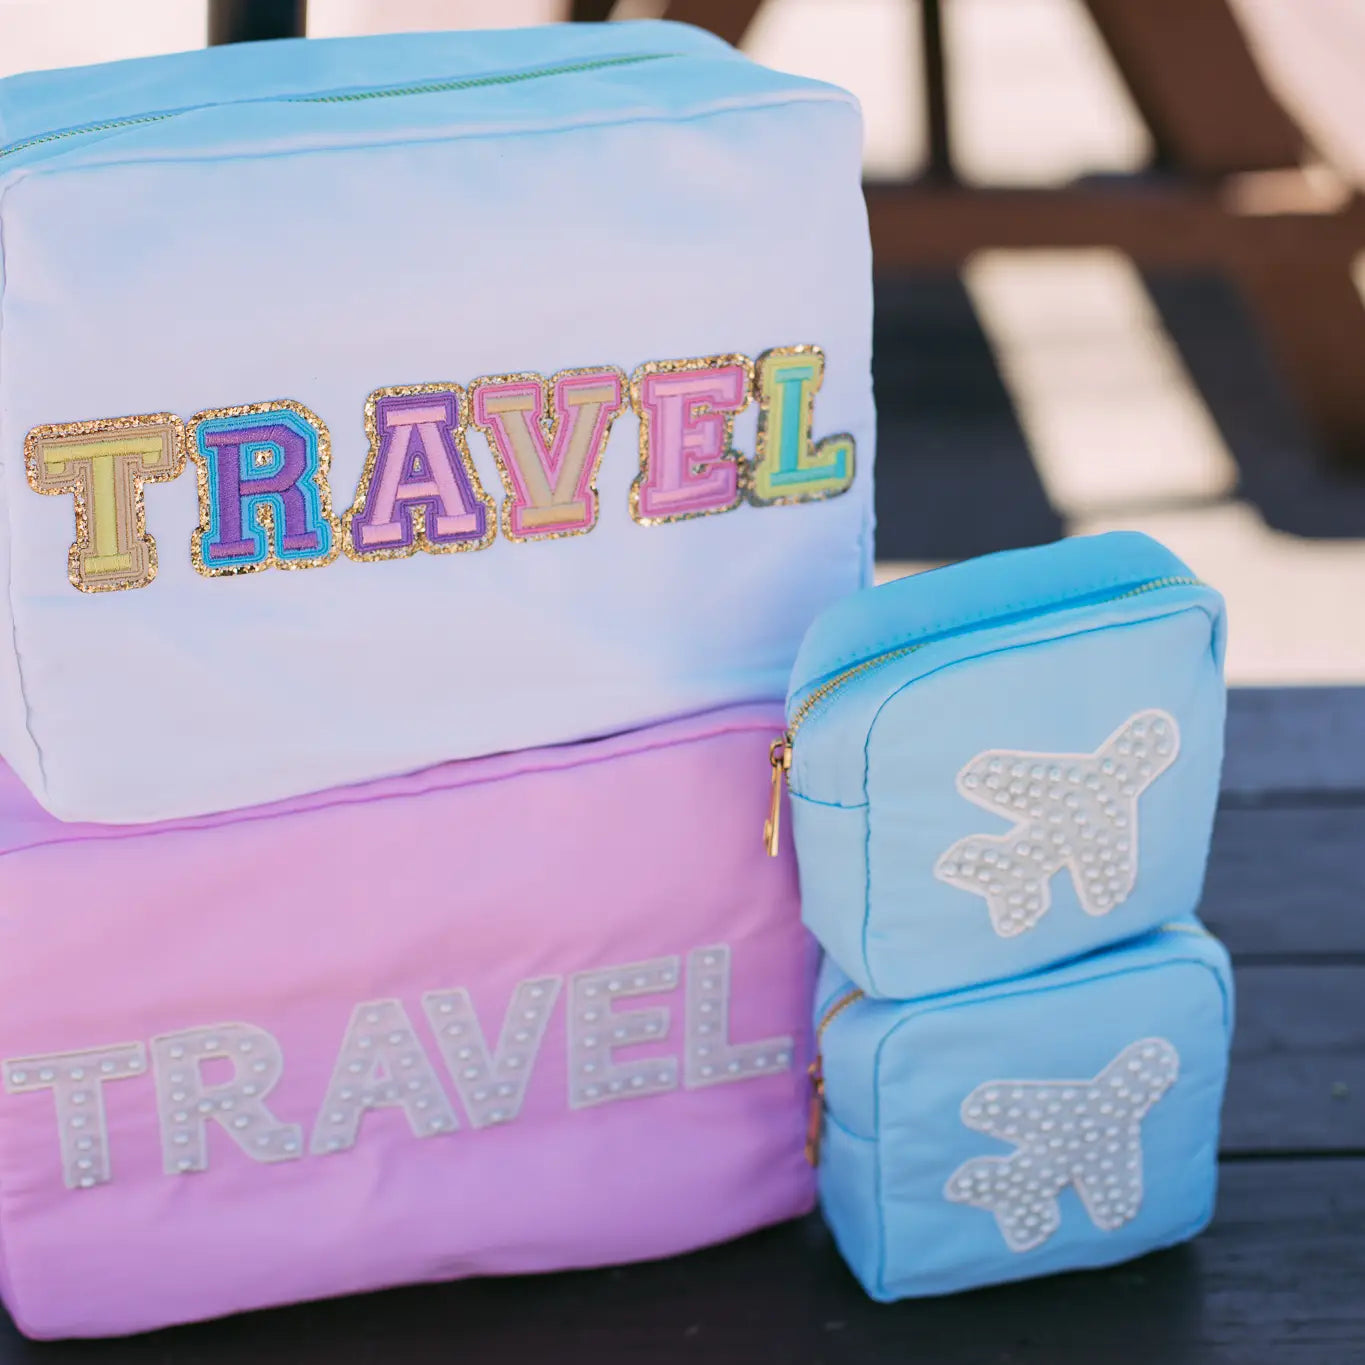 With their small compact size these minis are perfect for holding your on the go makeup collection, jewelry favs, or a throw all in your purse. Pair it with our any of our other medium, large, or xl makeup bags to create the dreamiest bathroom counter addition. Beaded Airplane patch is SEWN on.